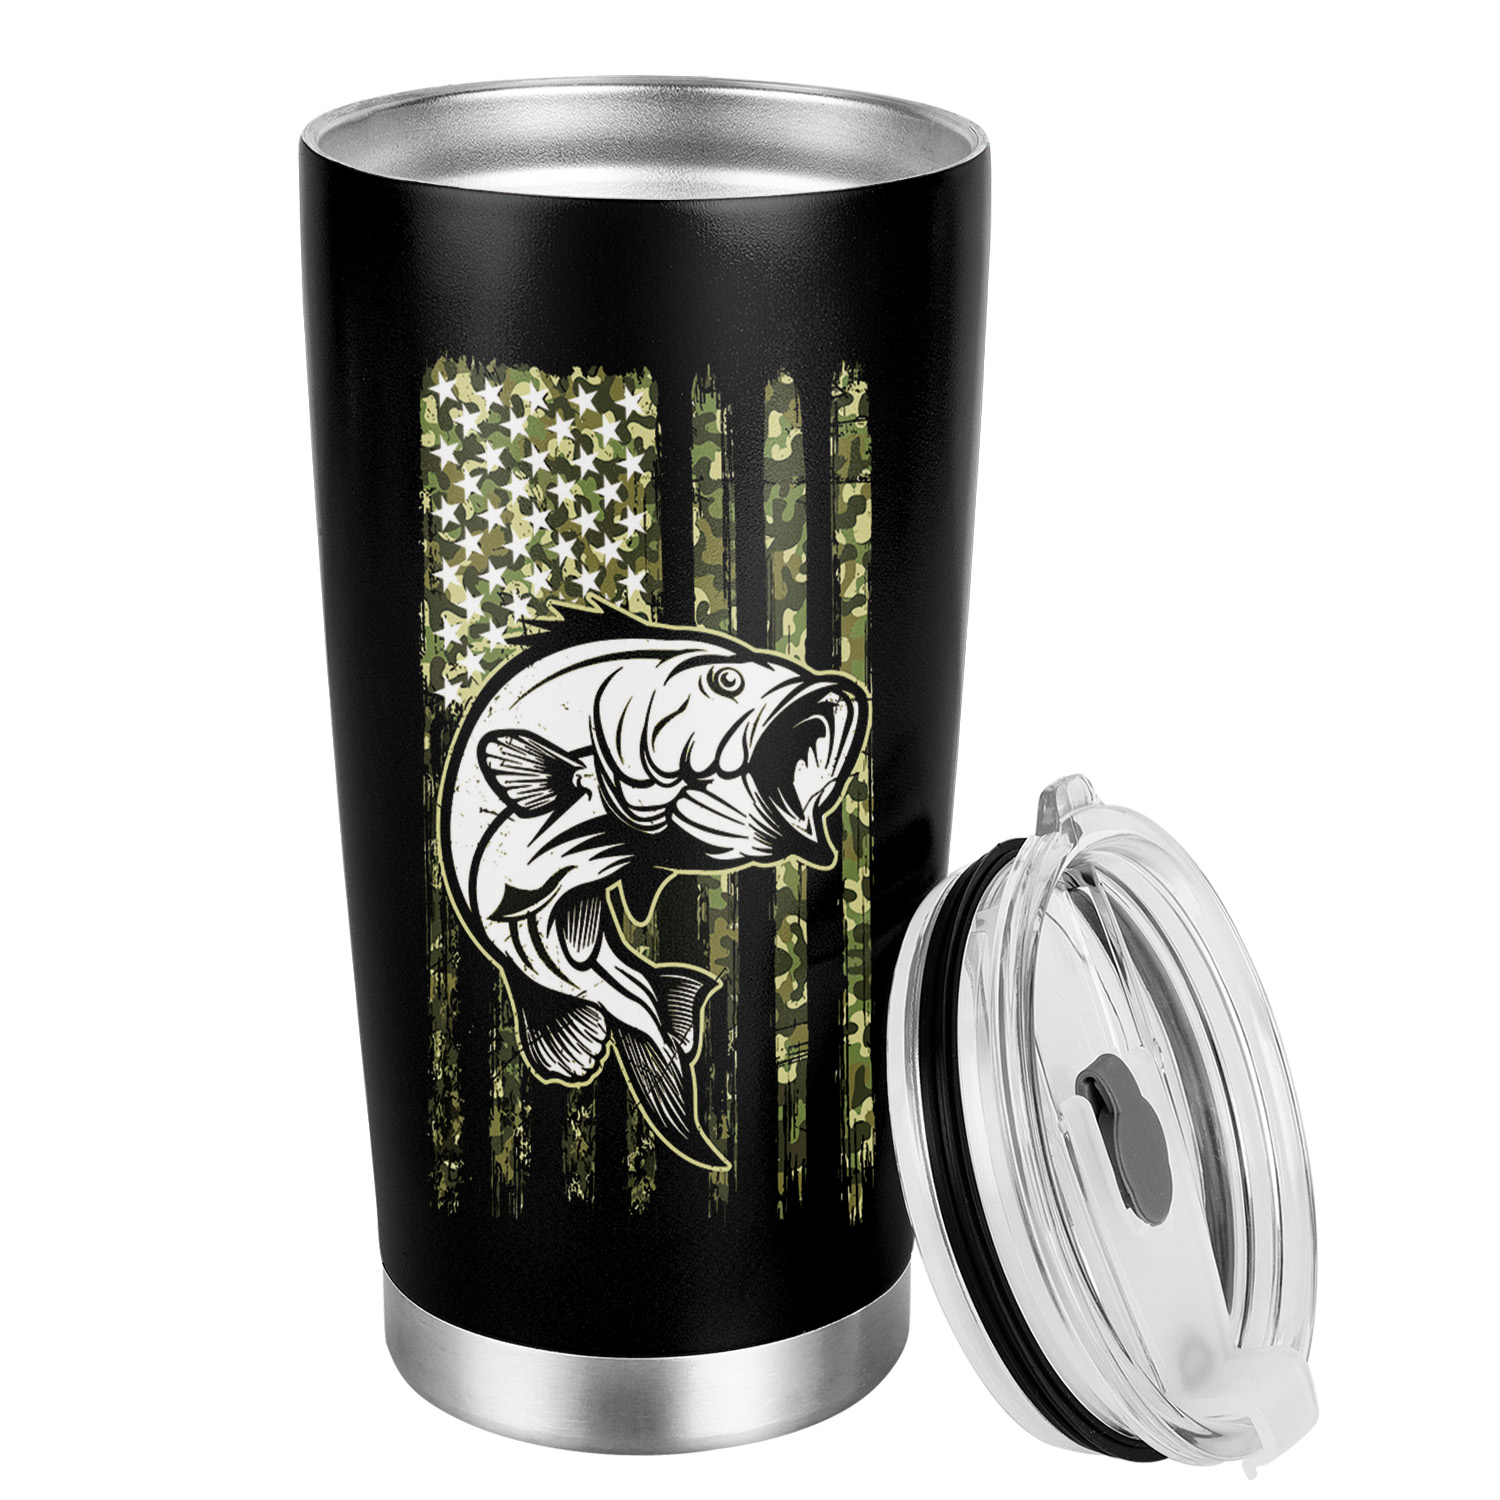 Outdoor for Men or Boyfriend Gift Ideas Coffee Tumbler - The Coffie Cutters